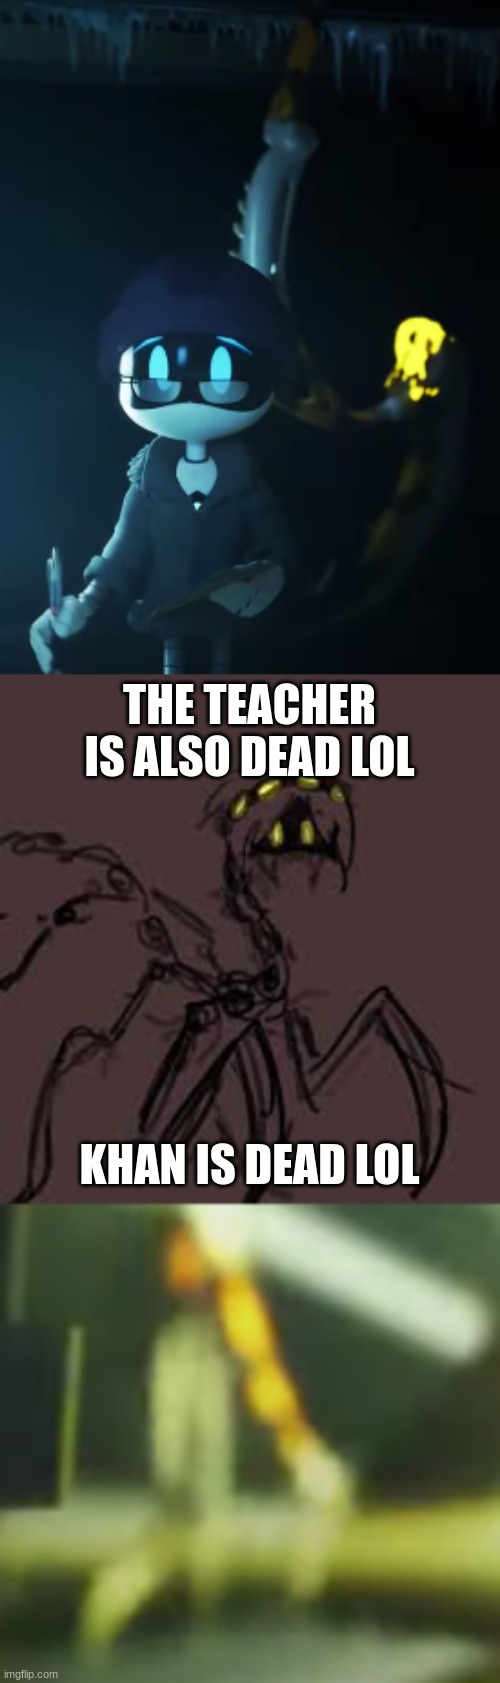 The murder drone mantis is real !1!! | THE TEACHER IS ALSO DEAD LOL; KHAN IS DEAD LOL | image tagged in murder drones,mantis,excuse me what the fuck | made w/ Imgflip meme maker